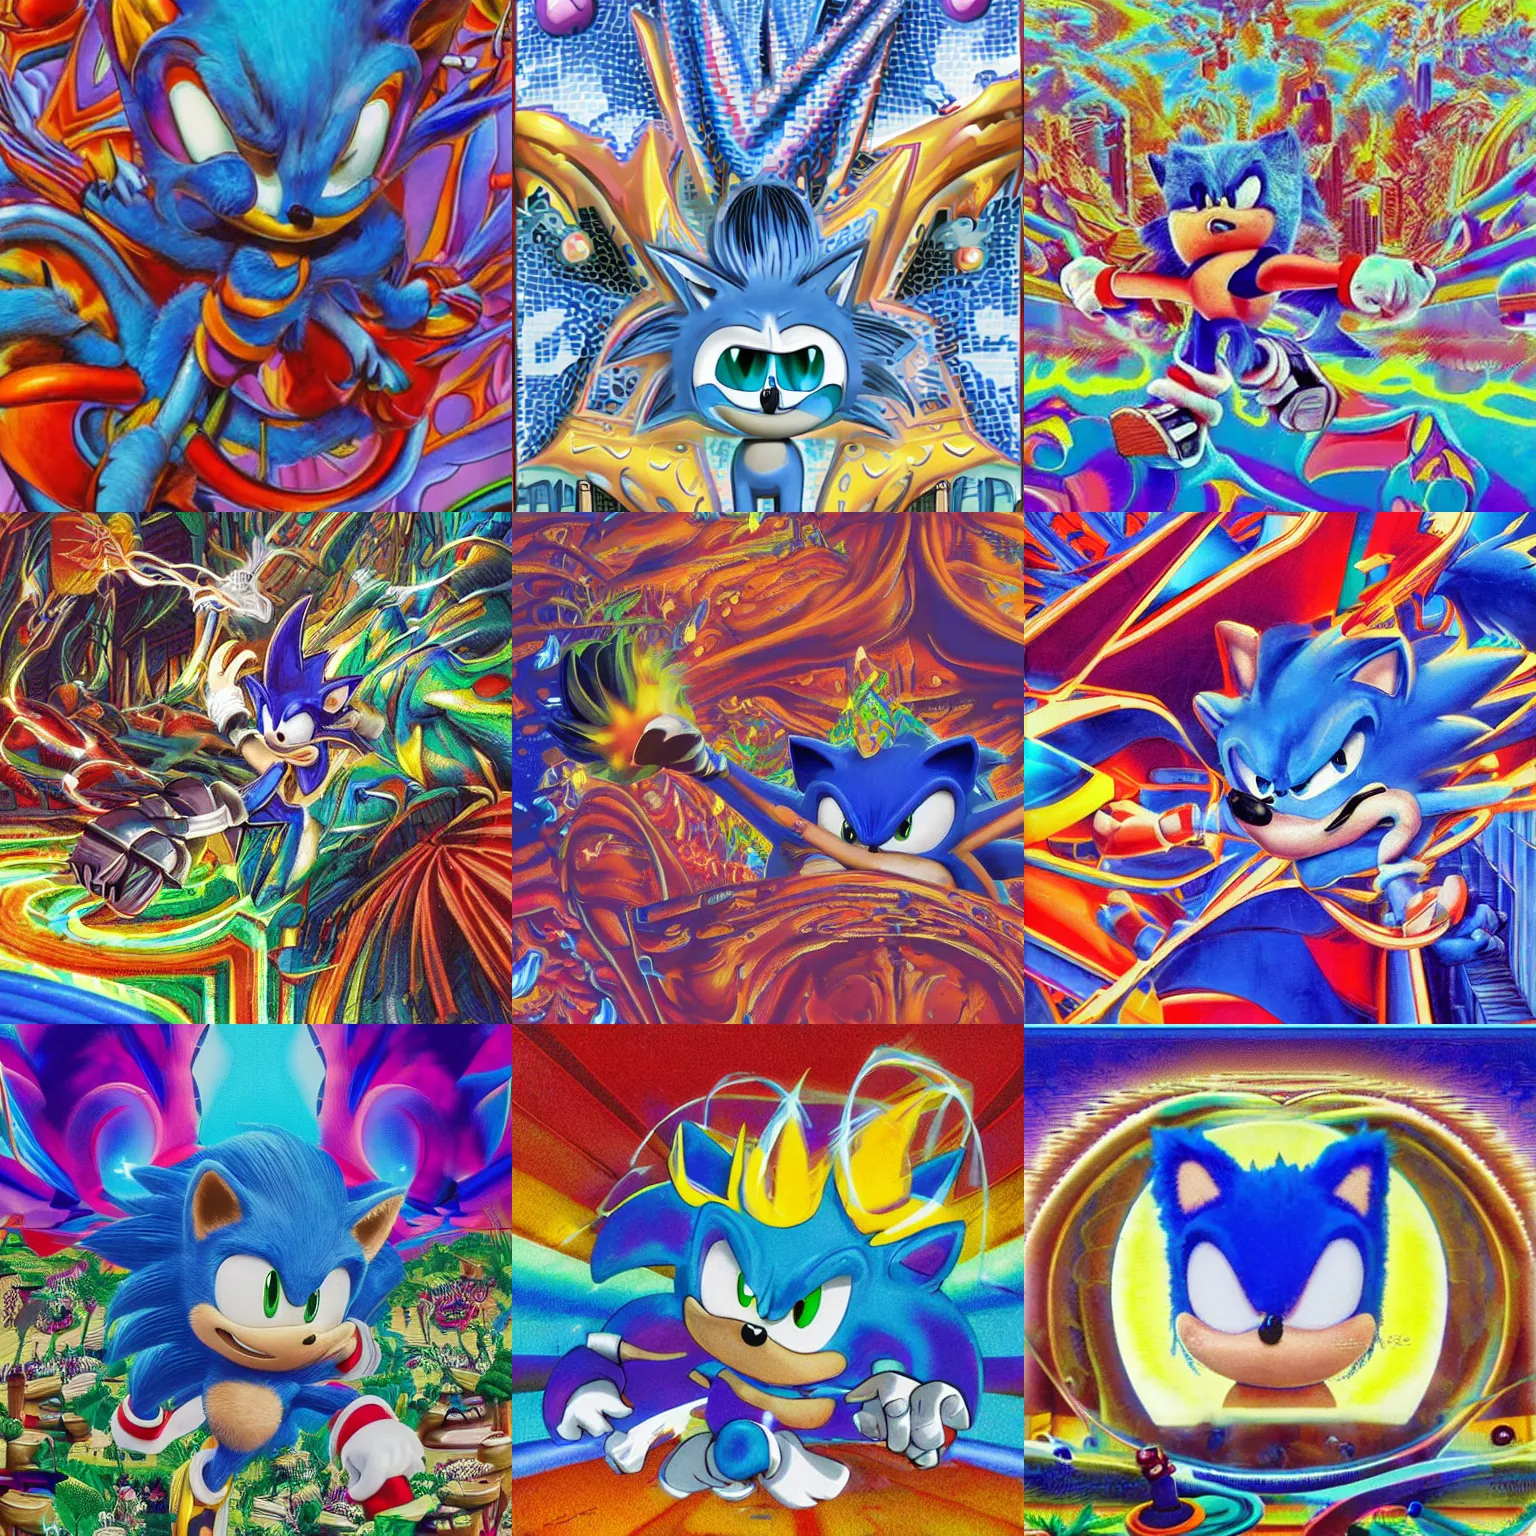 Prompt: close up sonic the hedgehog in a surreal, soft, ornate, professional, high quality airbrush art mgmt shpongle album cover of a chrome dissolving LSD DMT blue sonic the hedgehog surfing through vaporwave caves, checkerboard horizon , 1980s 1982 Sega Genesis video game album cover